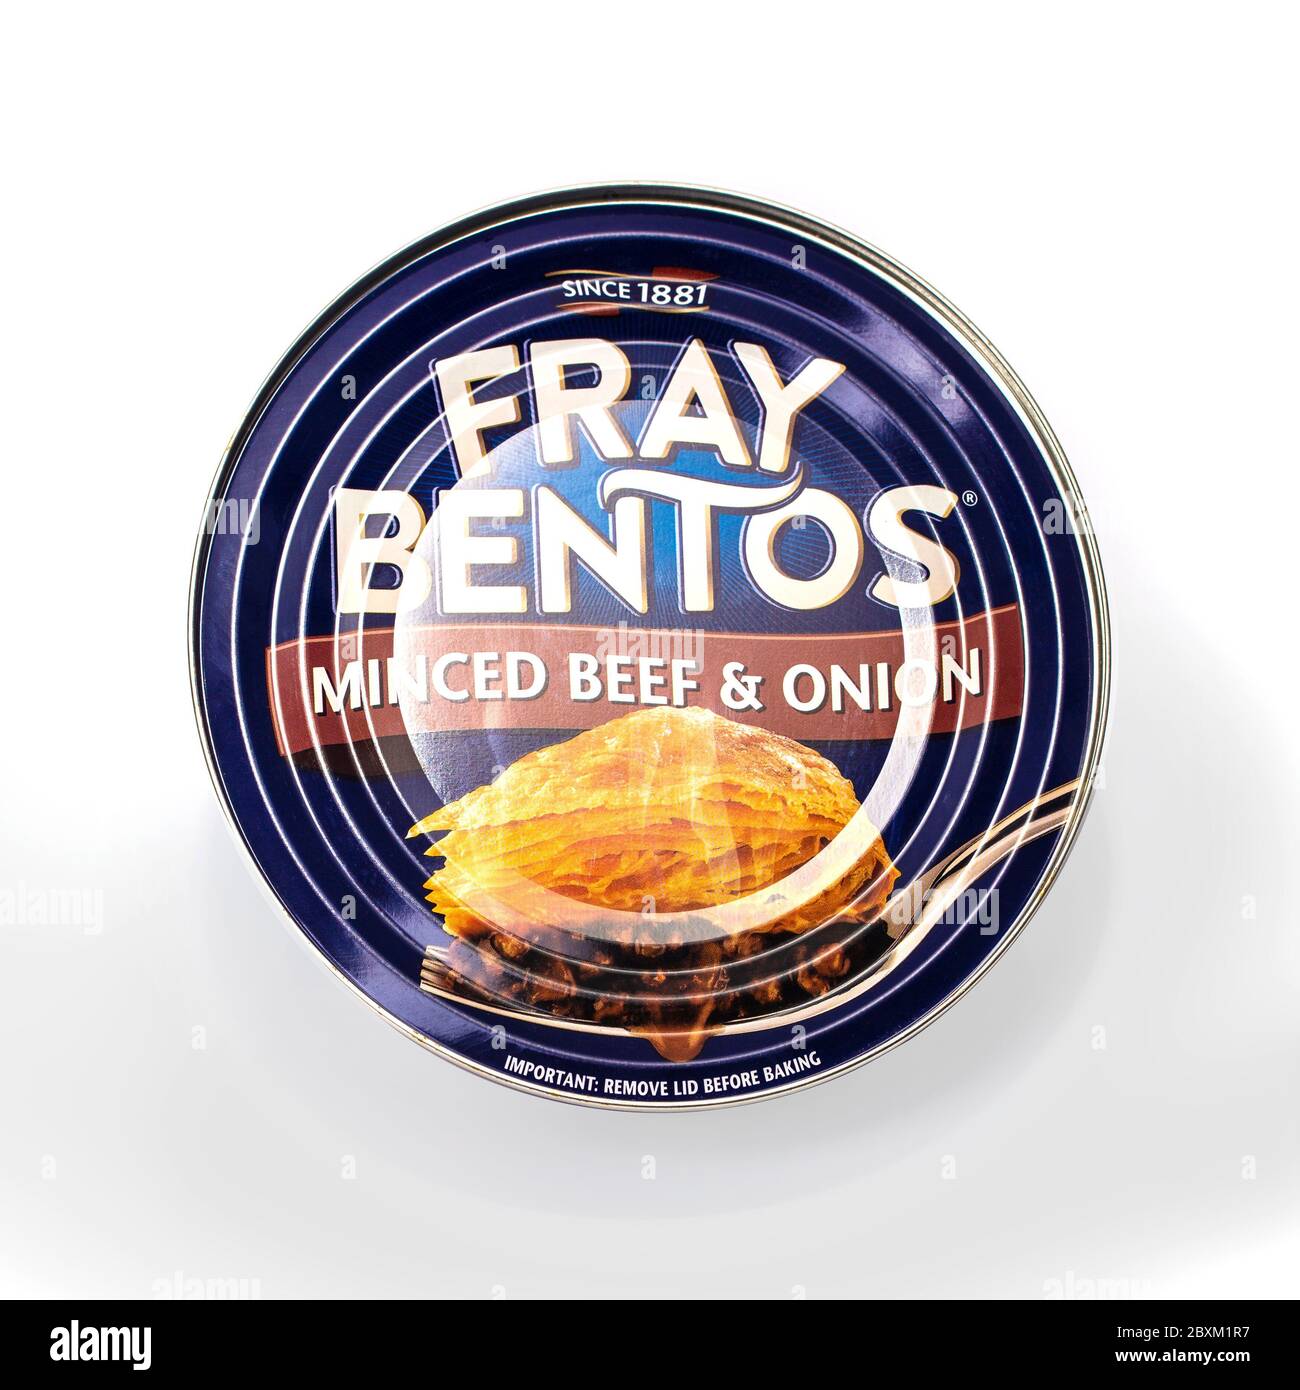 SWINDON, UK - JUNE 8, 2020: Fray Bentos Mince Beef and Onion Pie on a white background Stock Photo